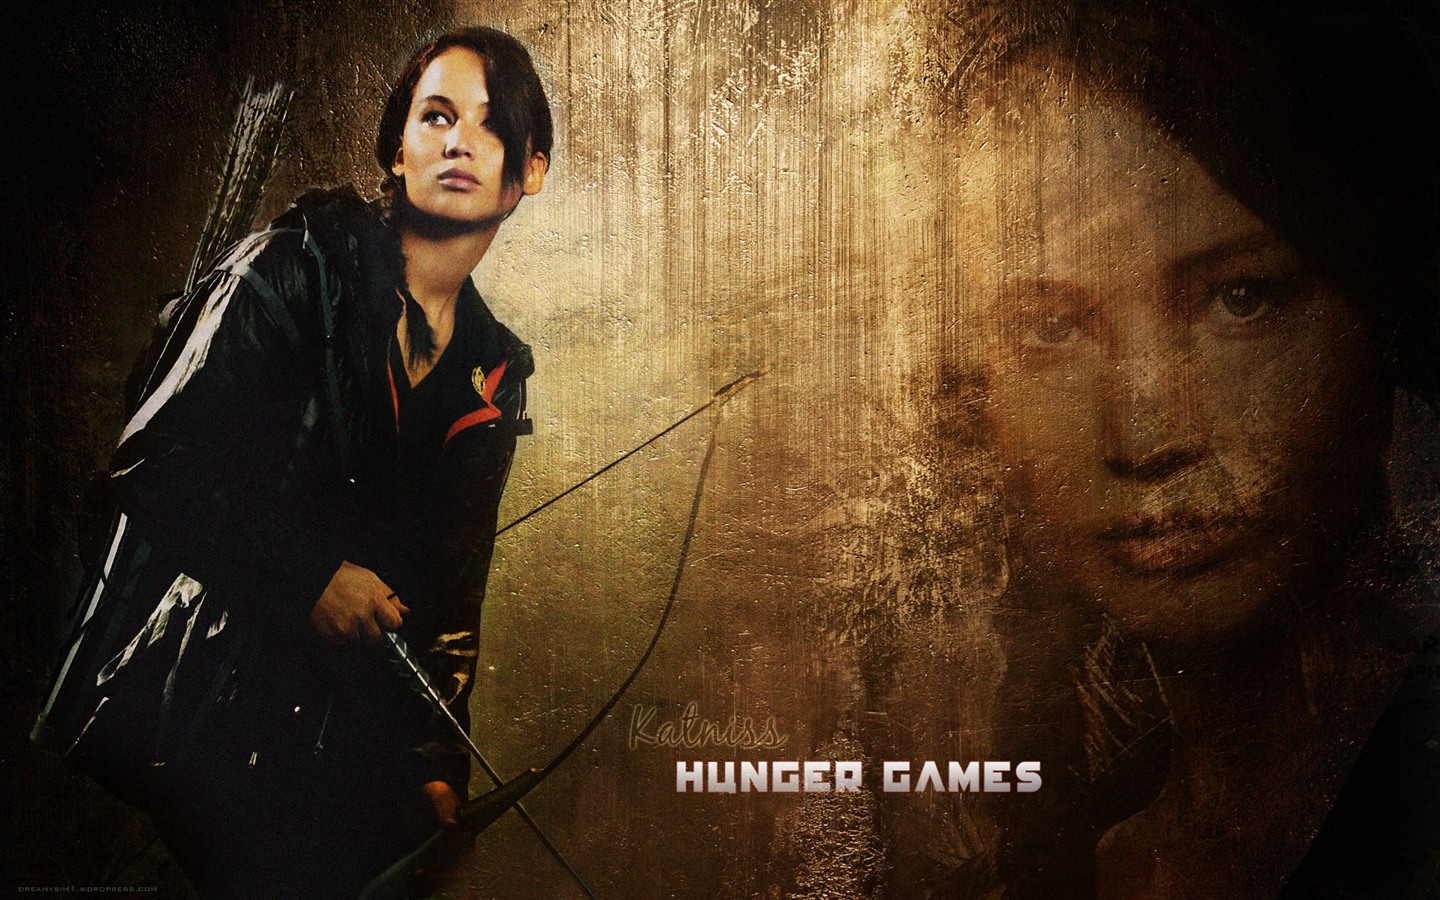 The Hunger Games HD wallpapers #8 - 1440x900